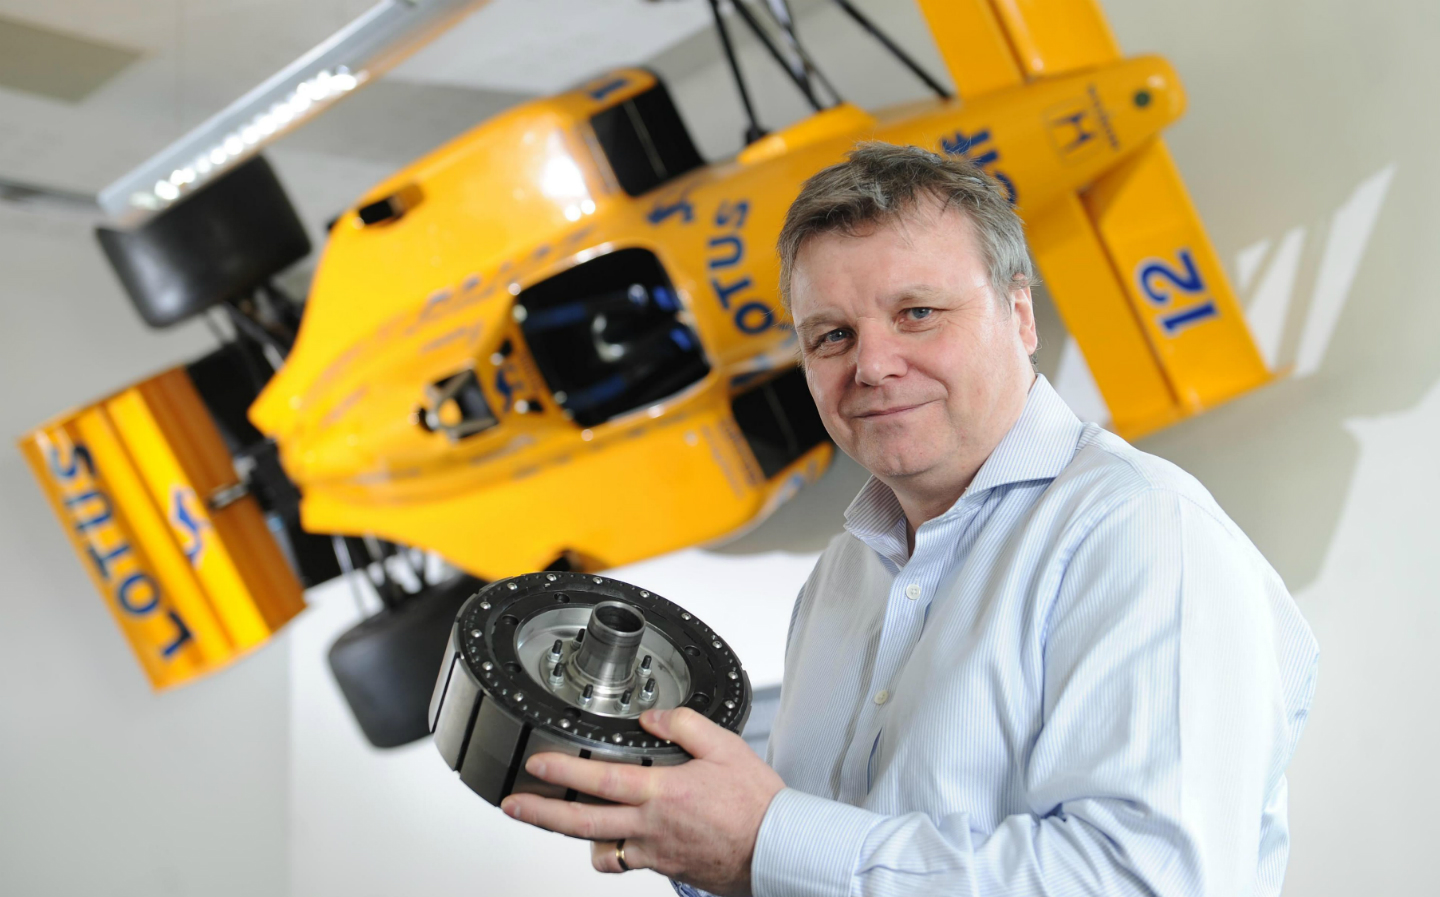 Equipmake founder Ian Foley: from Formula One racing to flying taxi tech